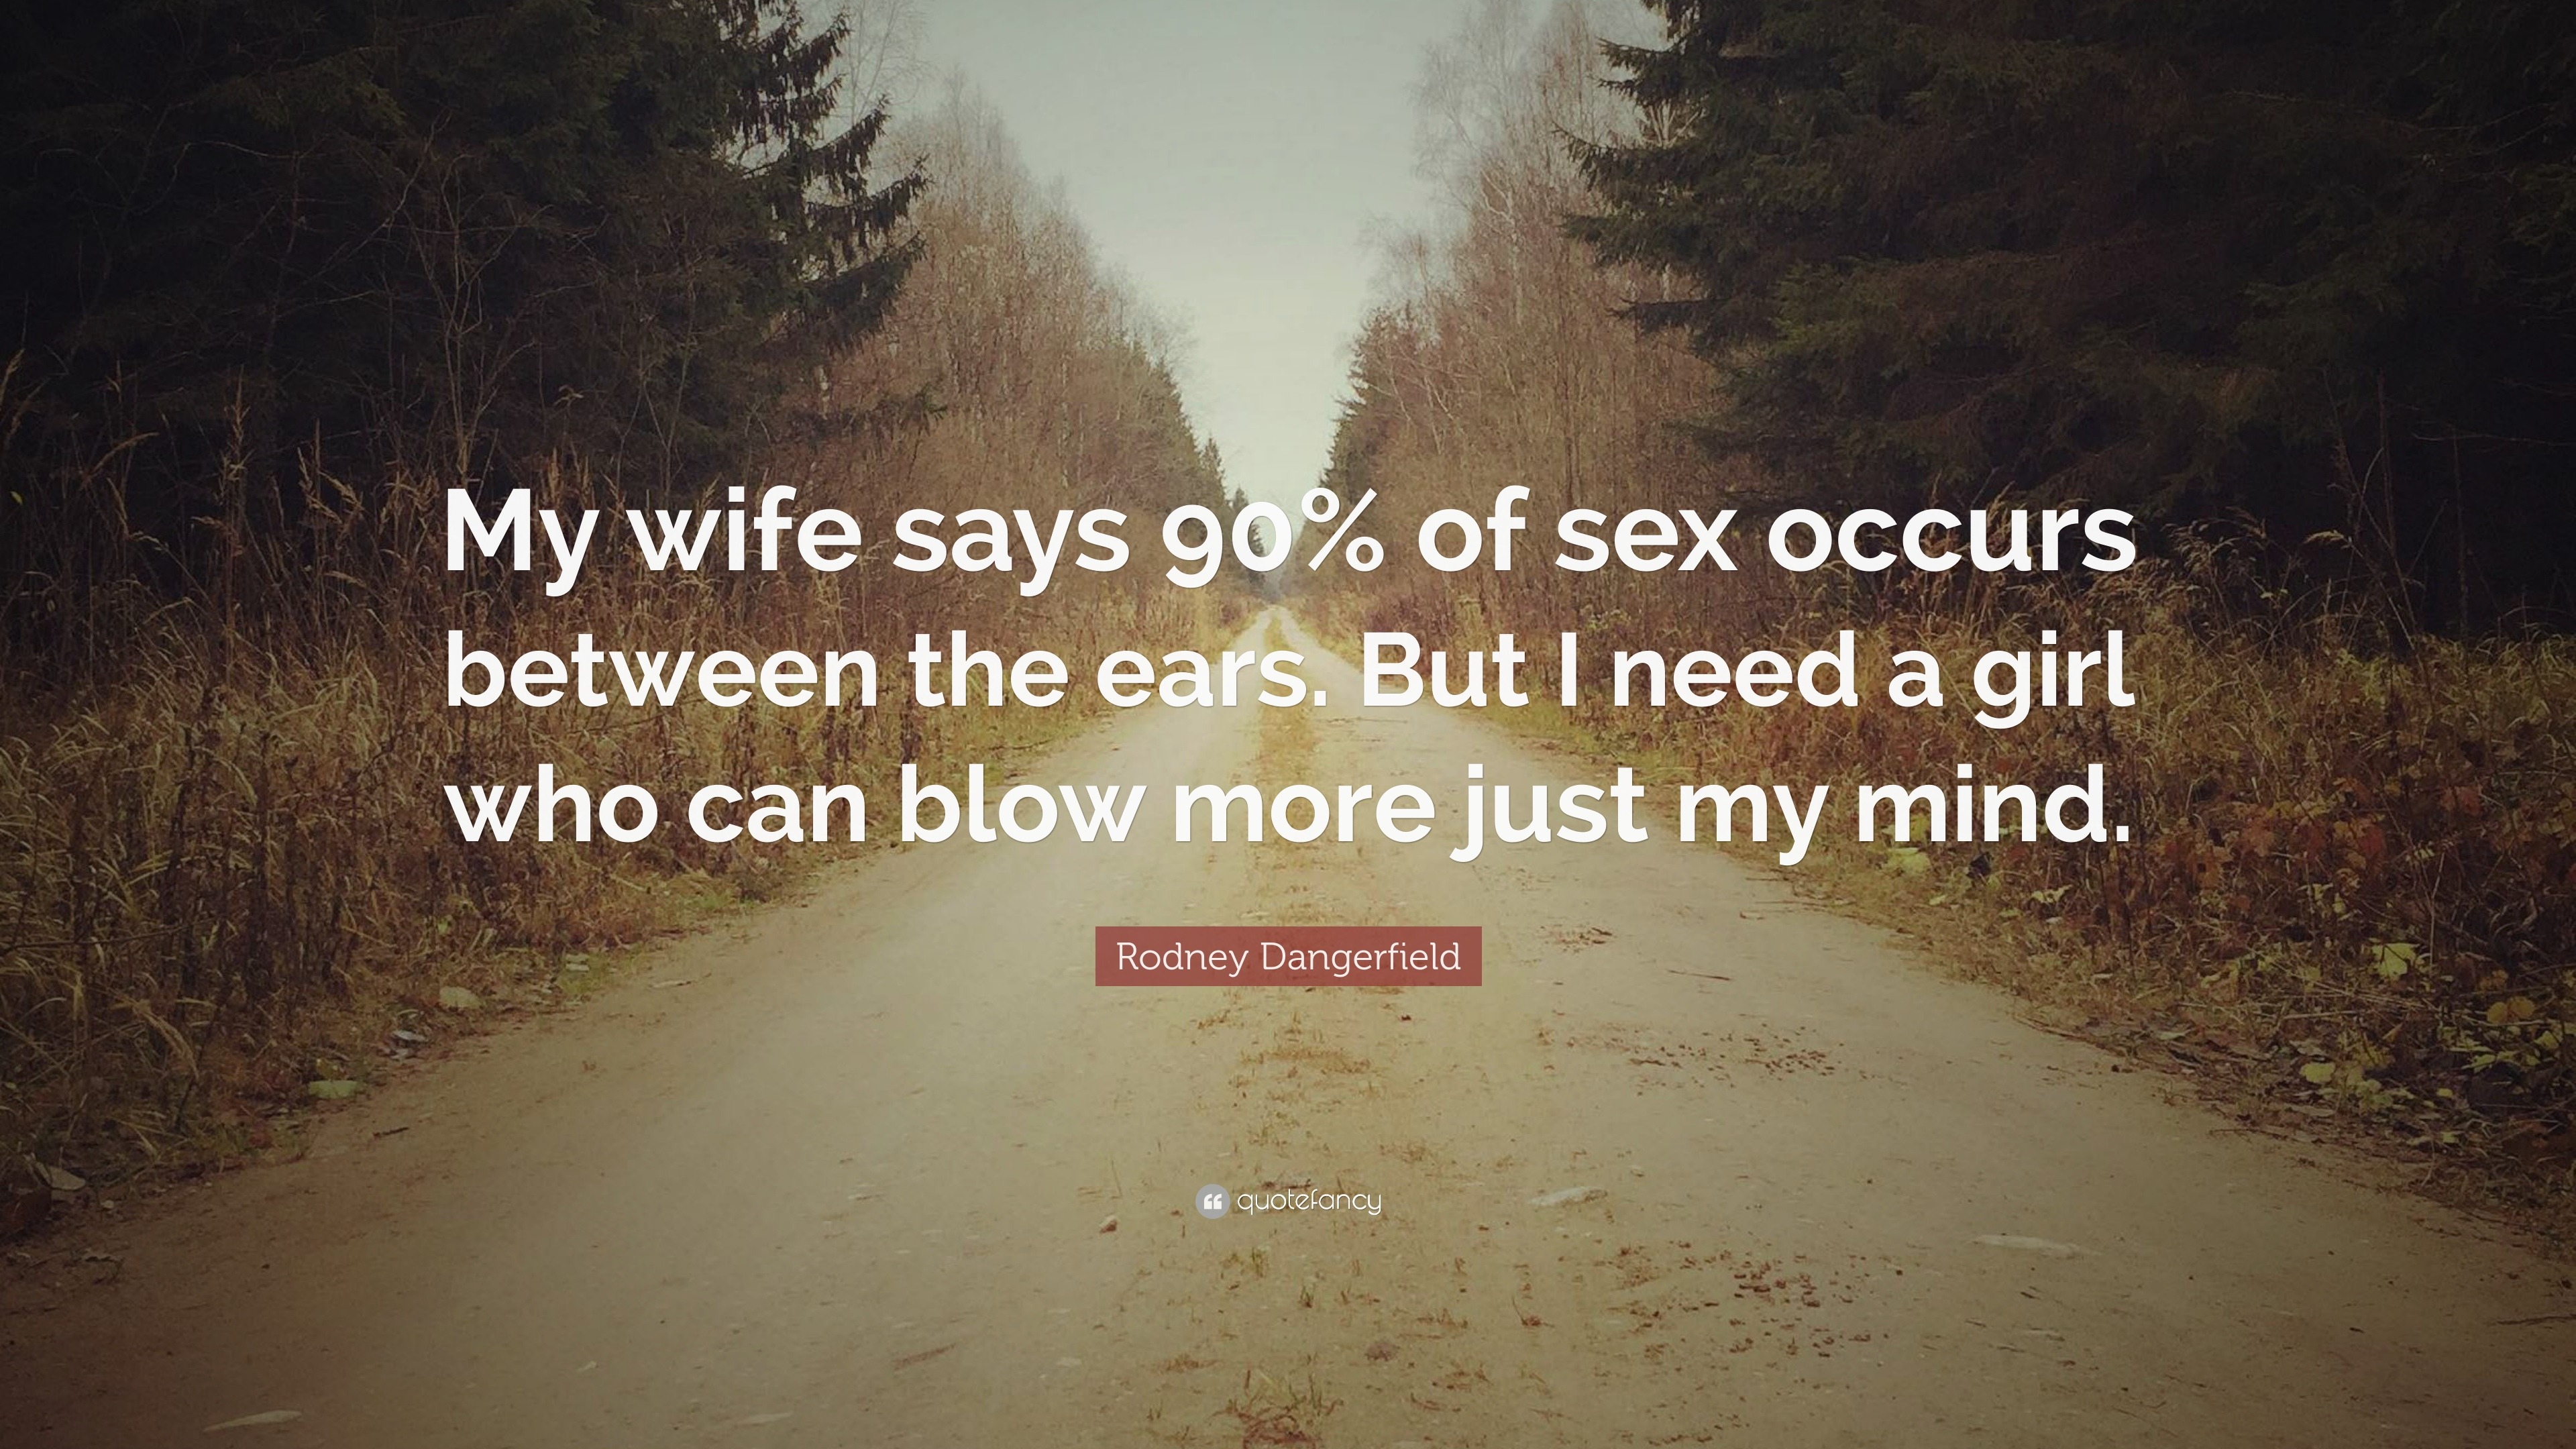 Rodney Dangerfield Quote “My wife says 90% of sex occurs between the ears picture